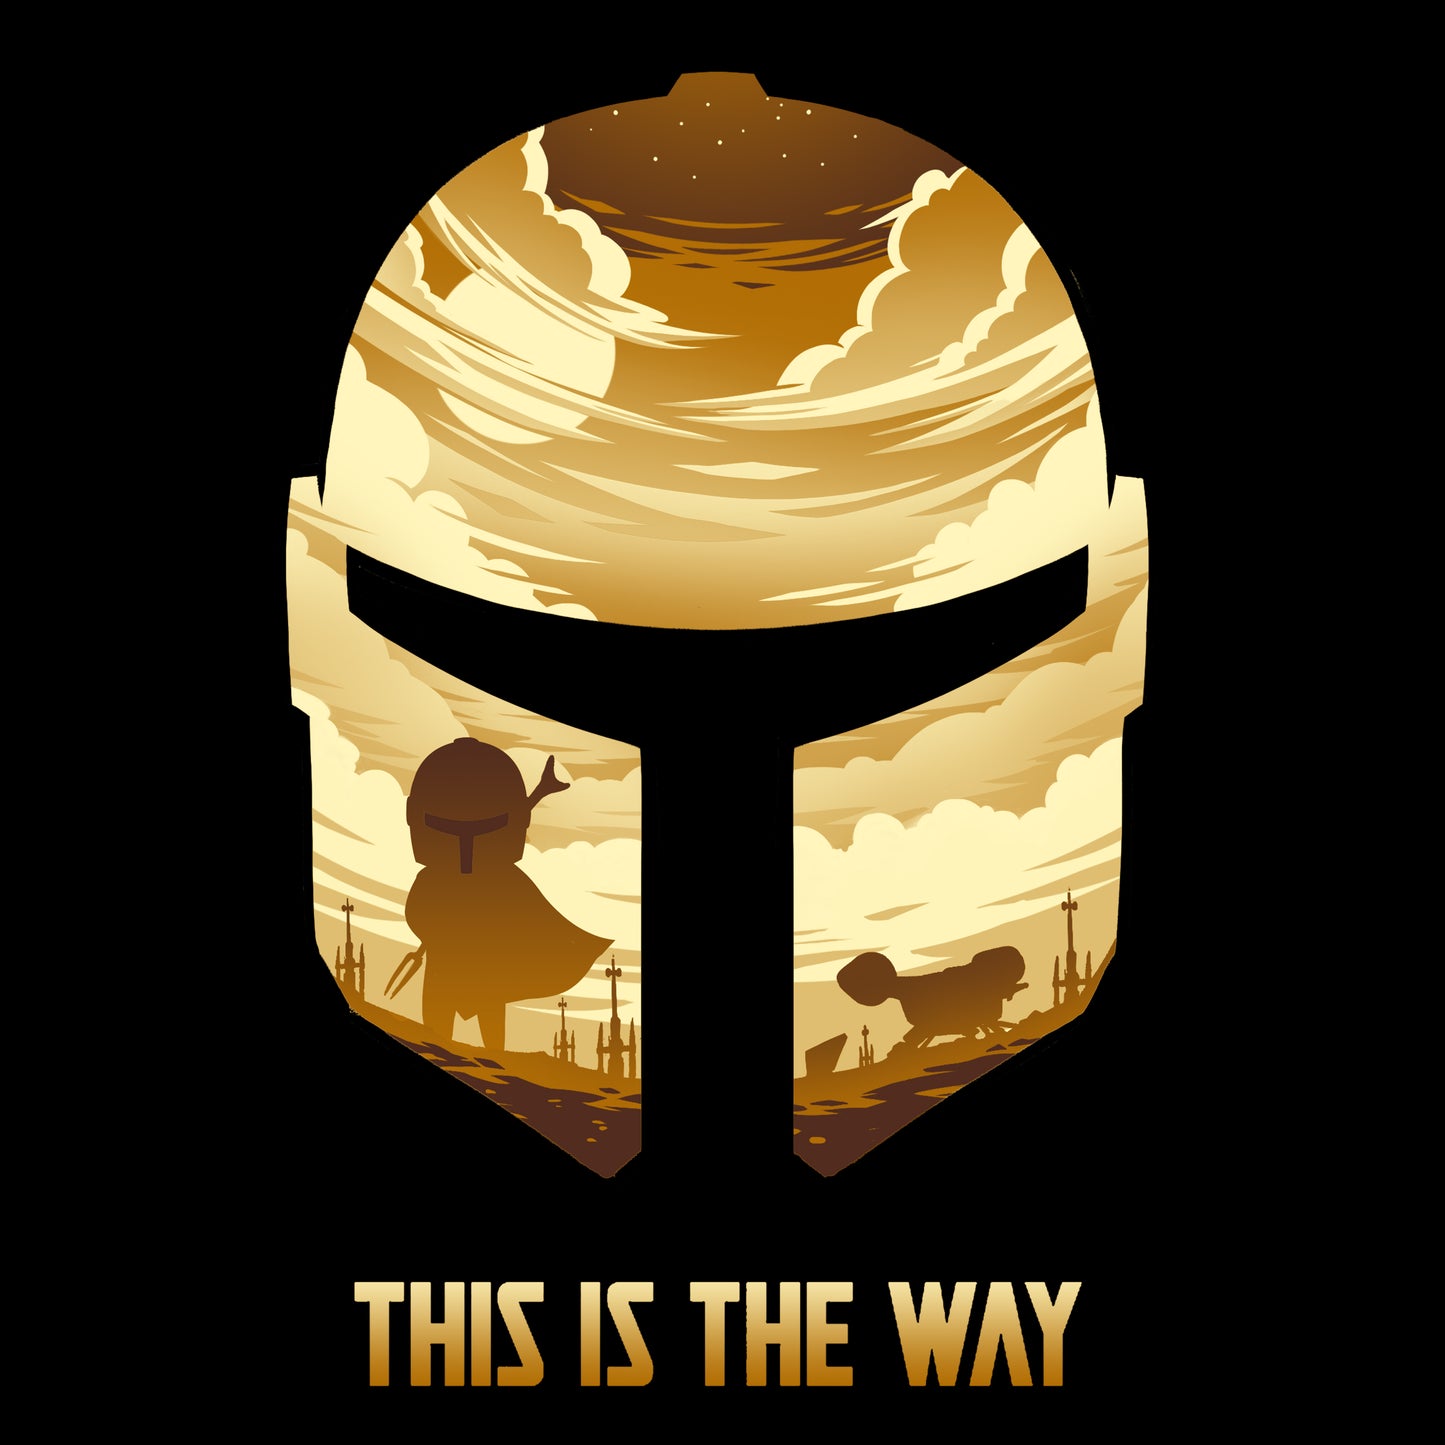 Officially licensed Star Wars "This is the Way" men's t-shirt.